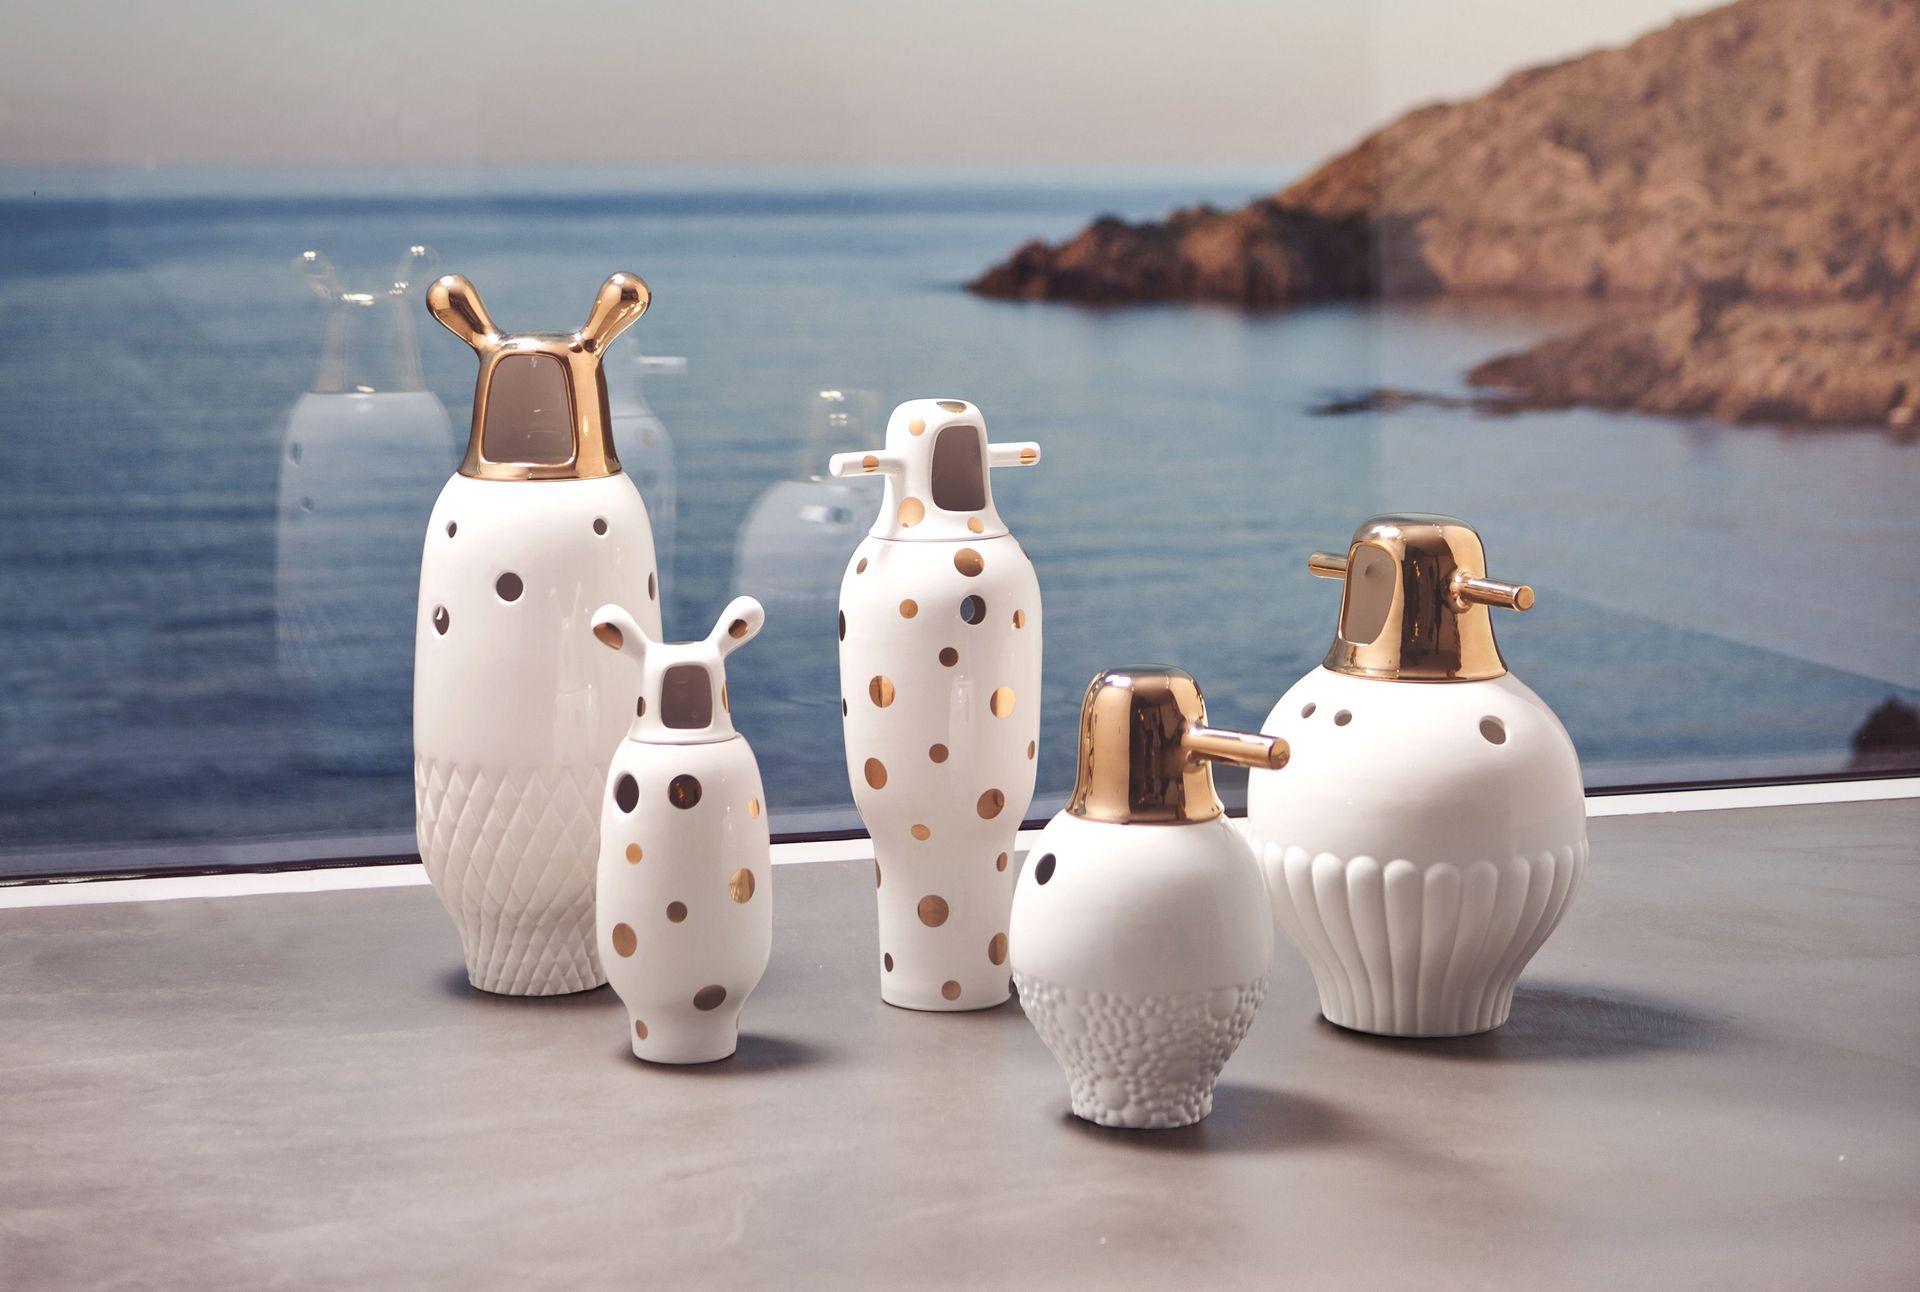 Set of showtime 10 vases by Jaime Hayon
Dimensions: D19 x H33, D31 x H34, D27 x H47, D21 x H48, D23 x H59 cm
Materials: Made up of two pieces in glazed stoneware, with a white finish and 24-carat gold plated decorations.
Also available in other